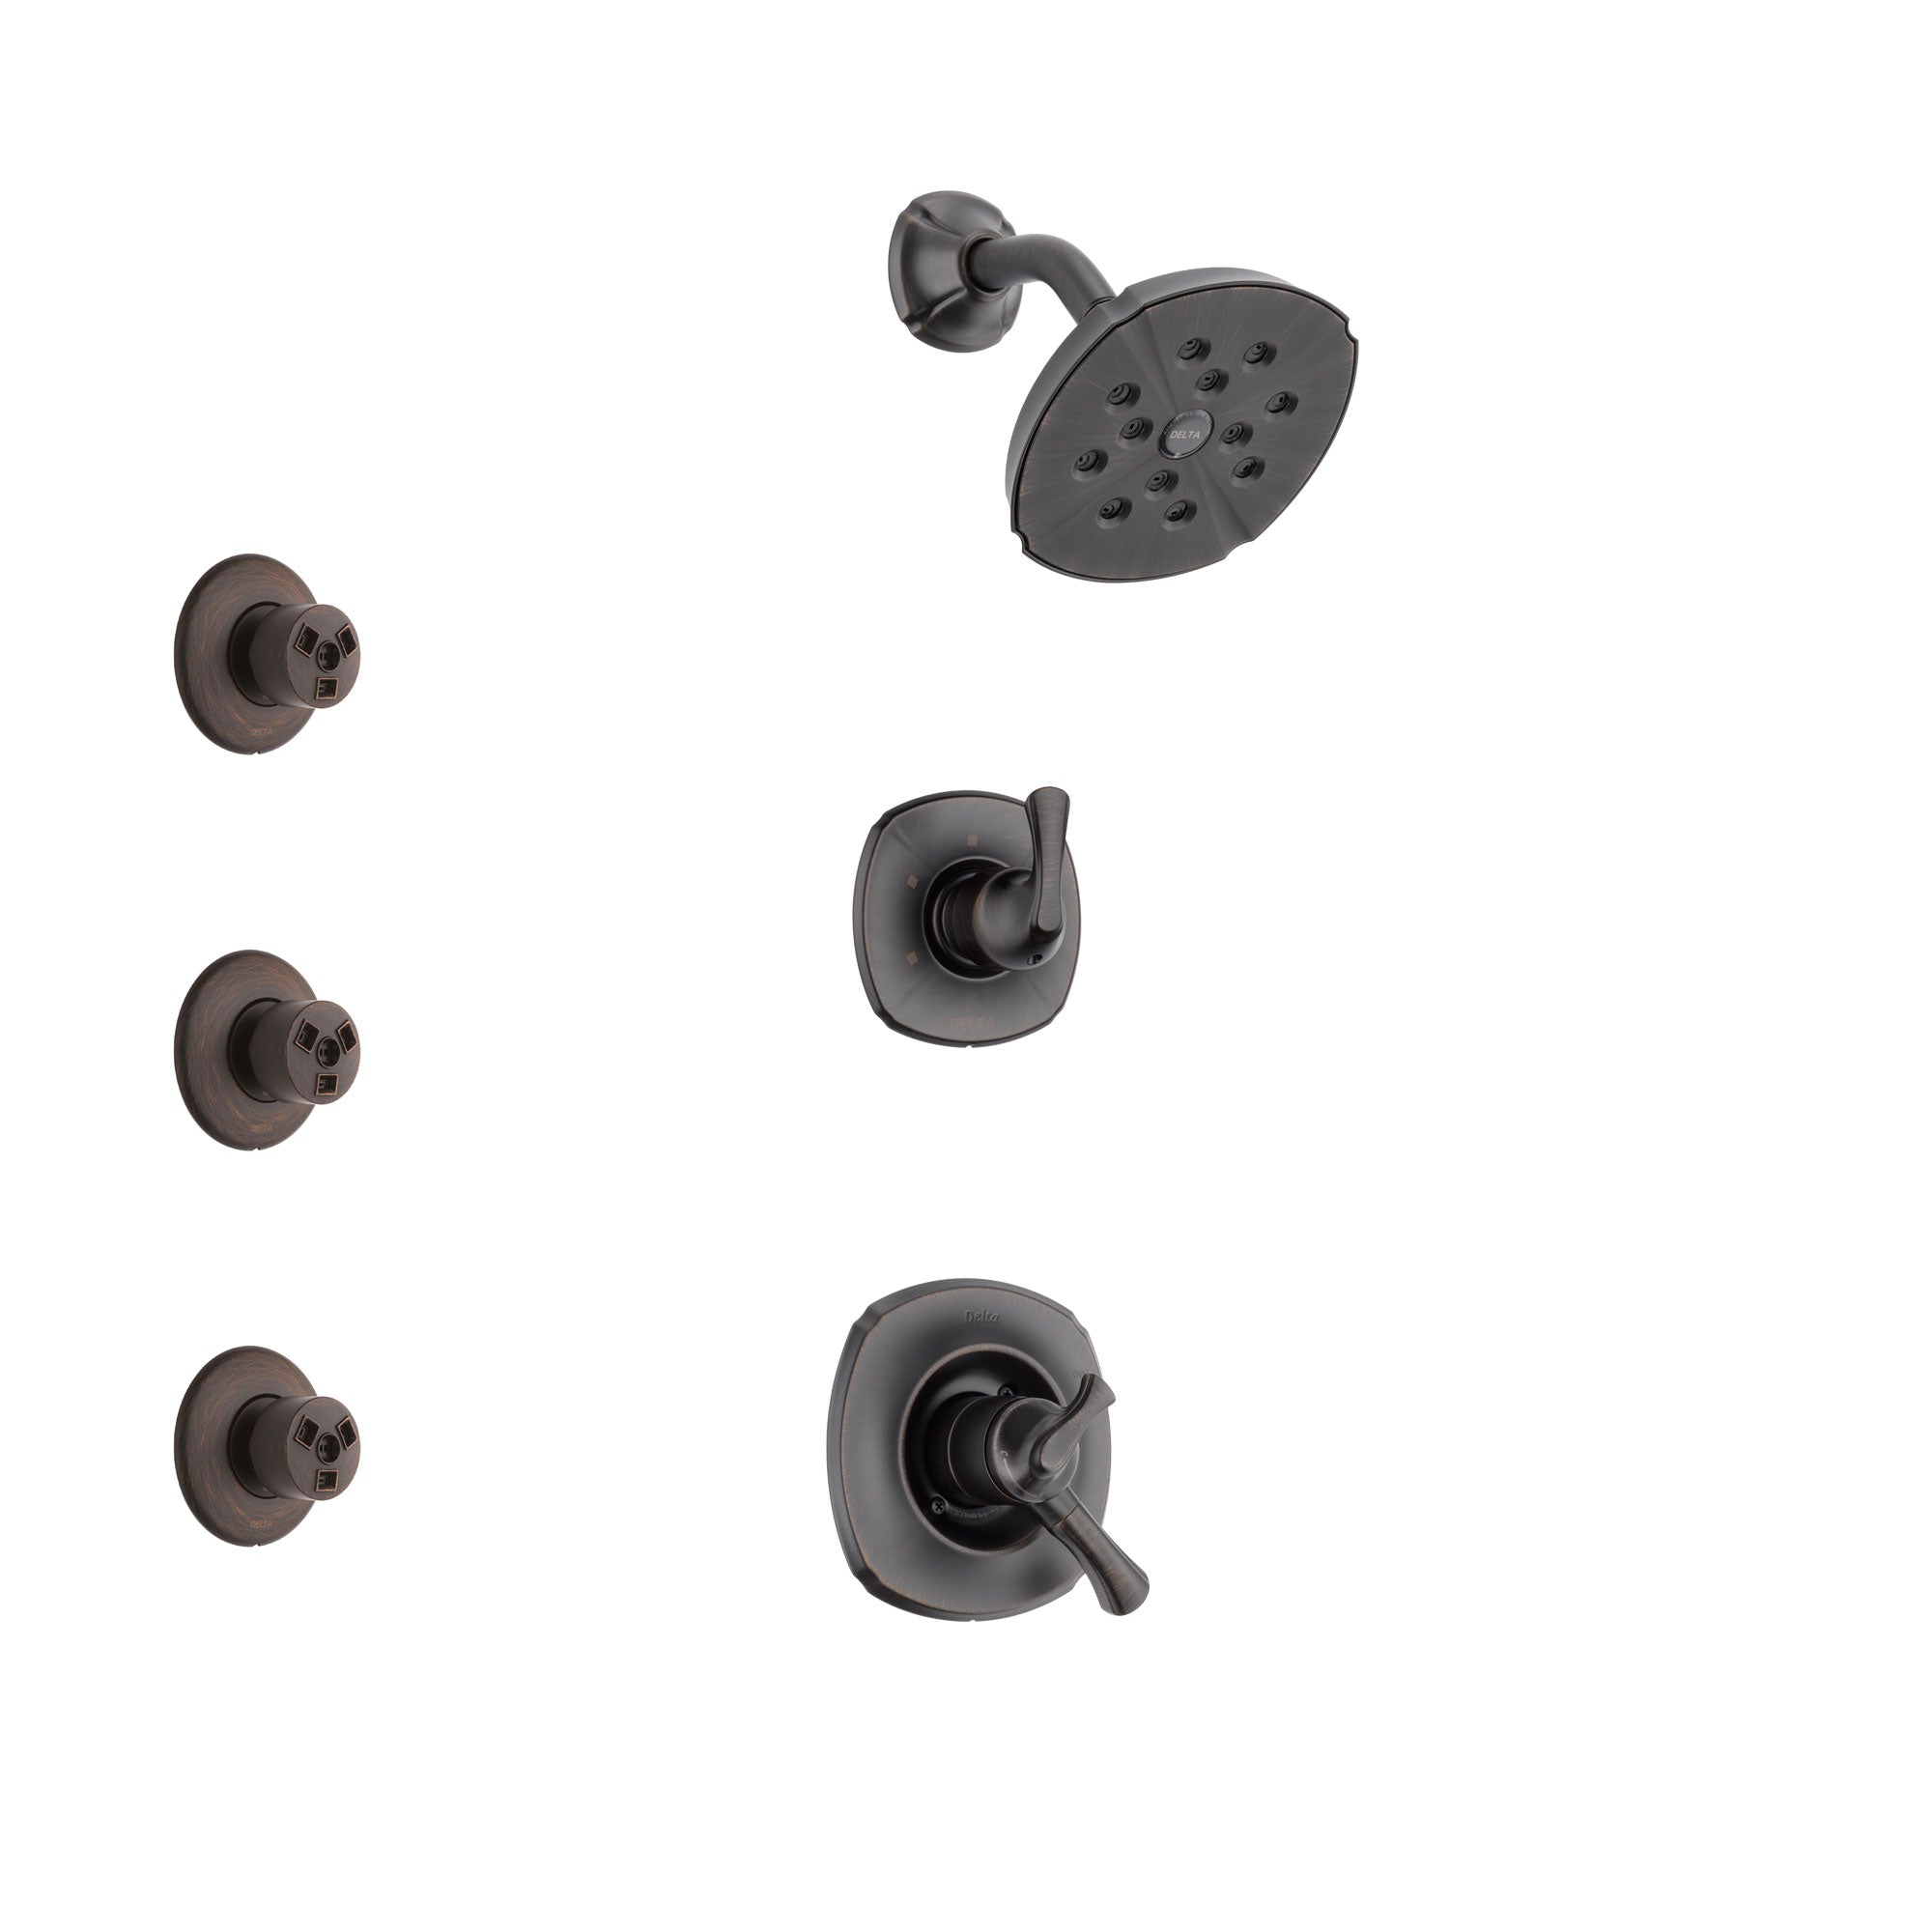 Delta Addison Venetian Bronze Finish Shower System with Dual Control Handle, 3-Setting Diverter, Showerhead, and 3 Body Sprays SS17292RB2